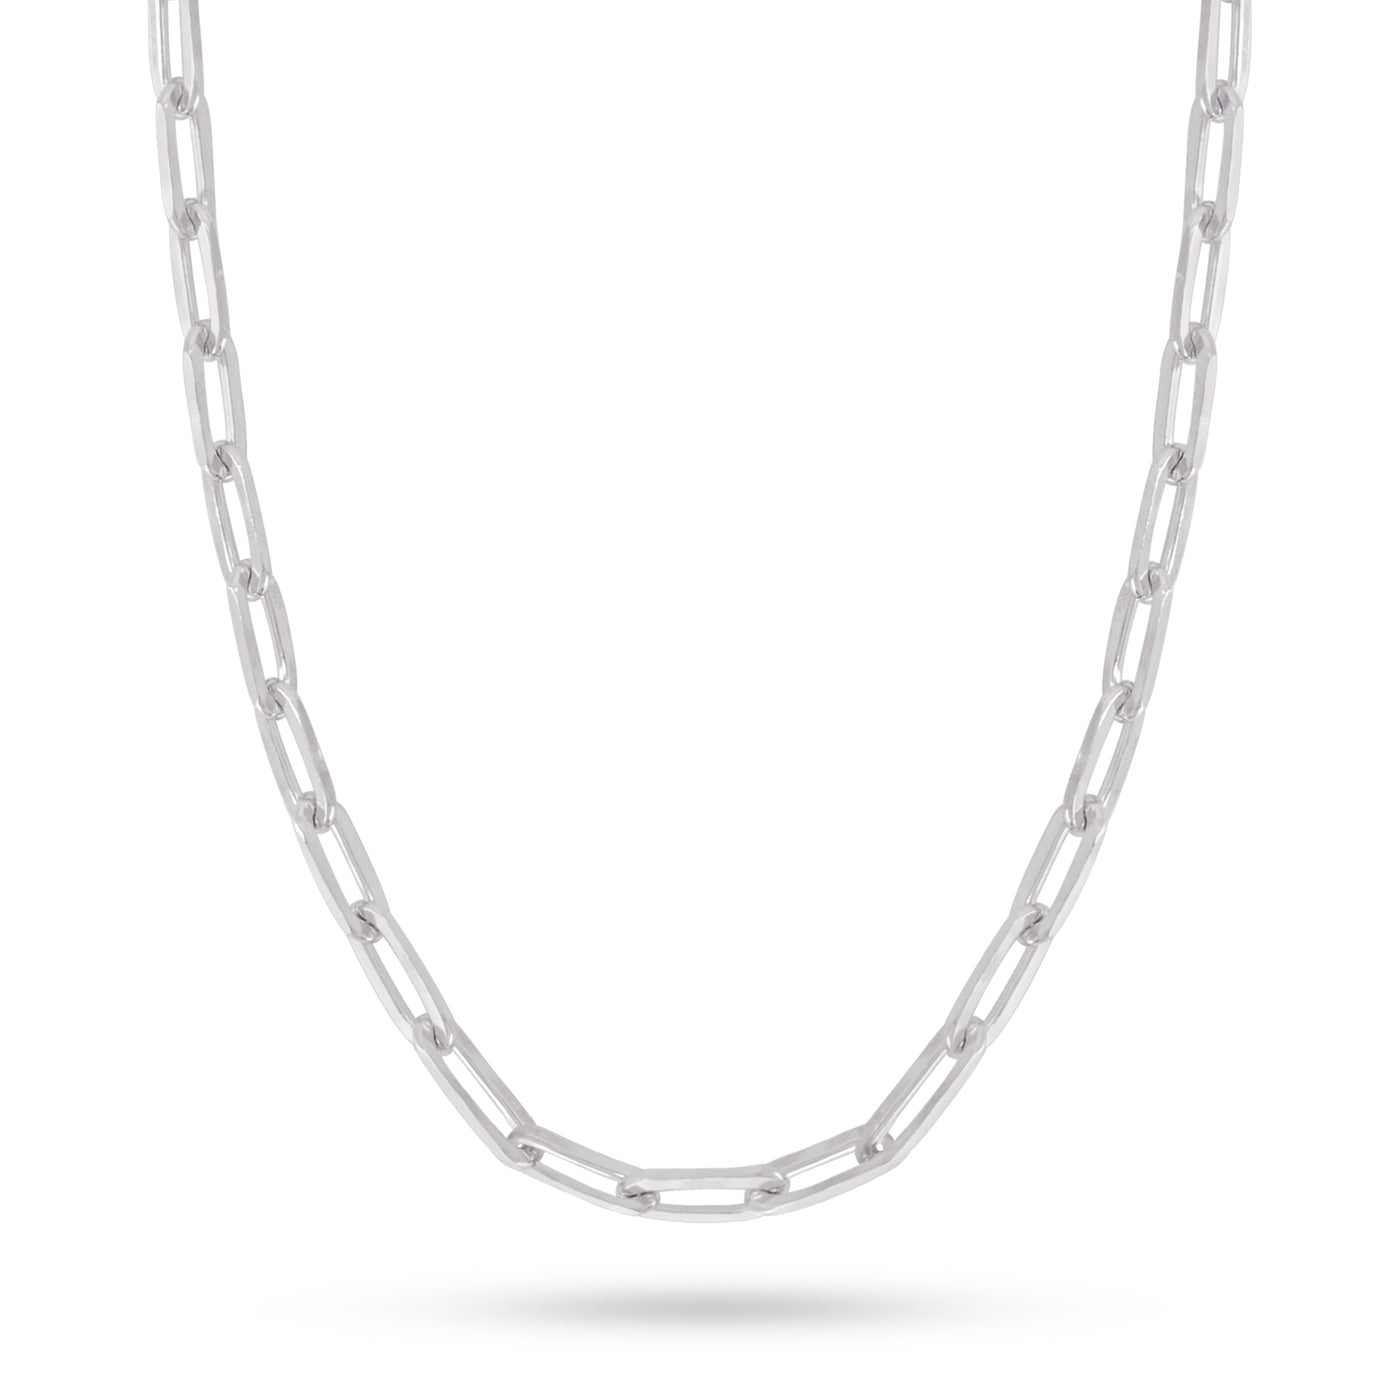 Silver Paperclip Chain Necklaces